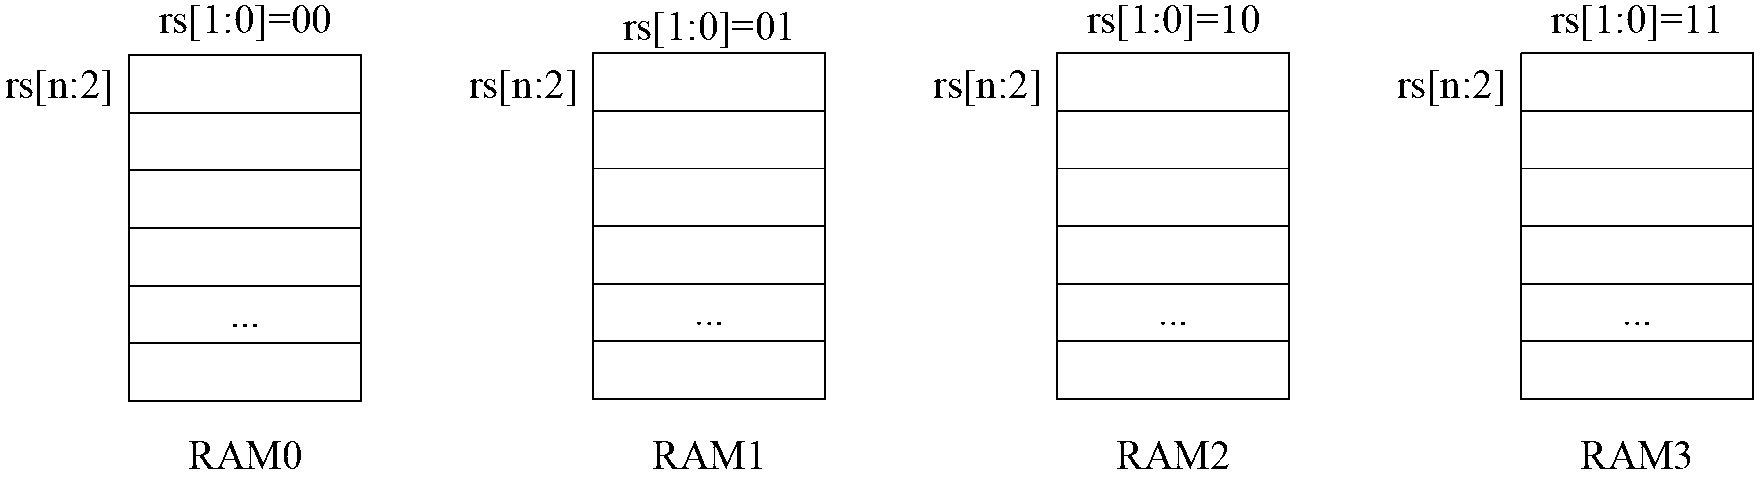 Register circuit realizing grouping addressing and read write control method for register files